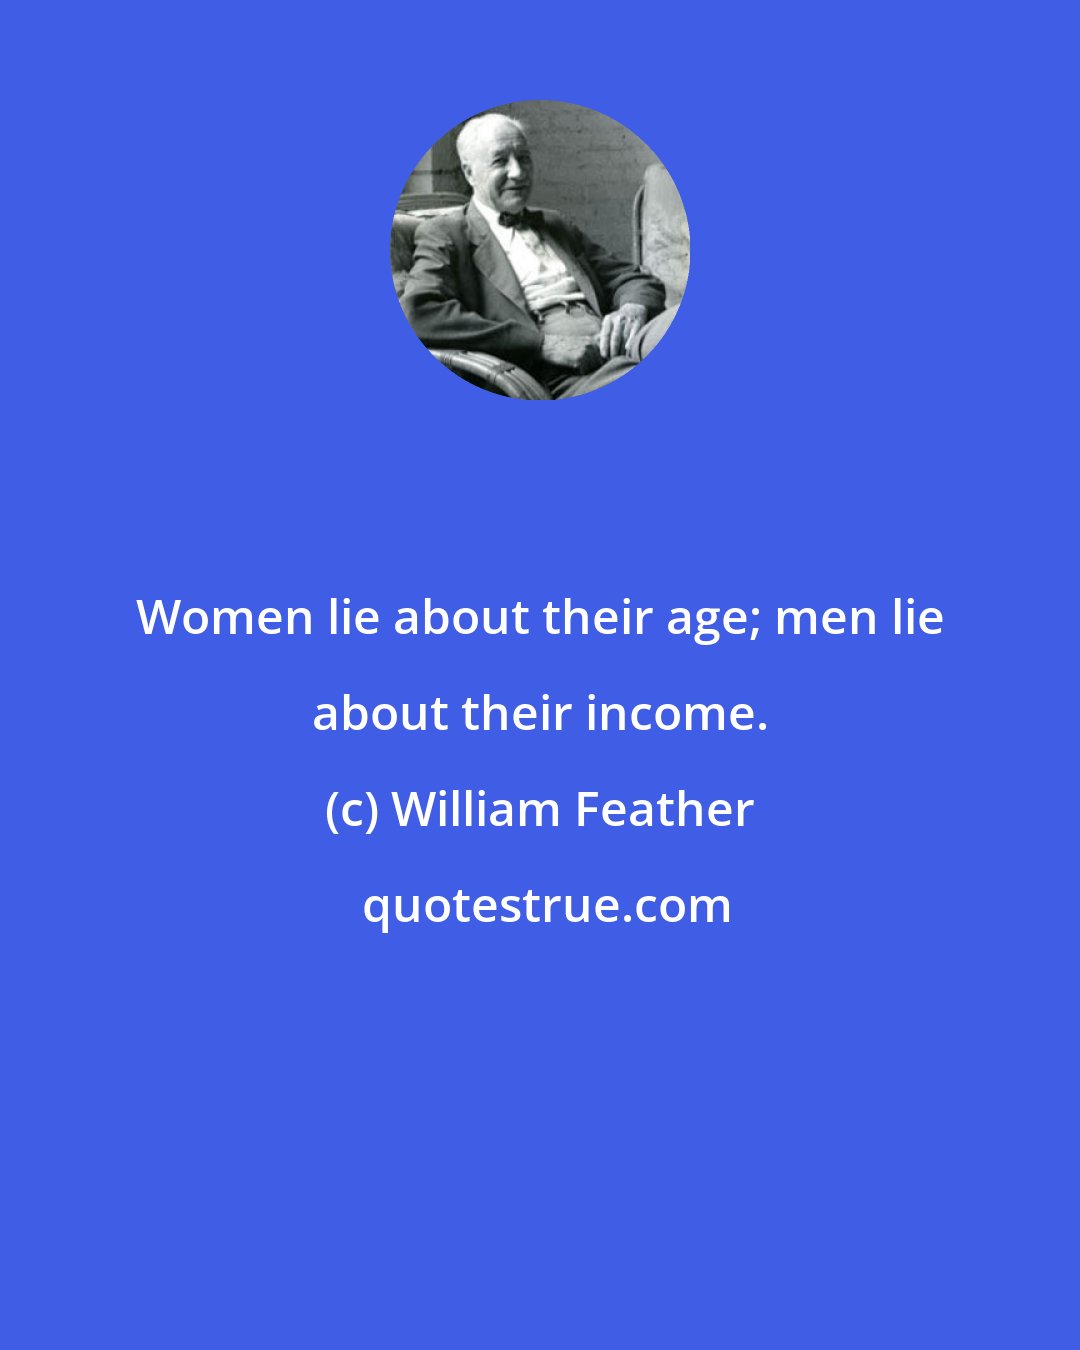 William Feather: Women lie about their age; men lie about their income.